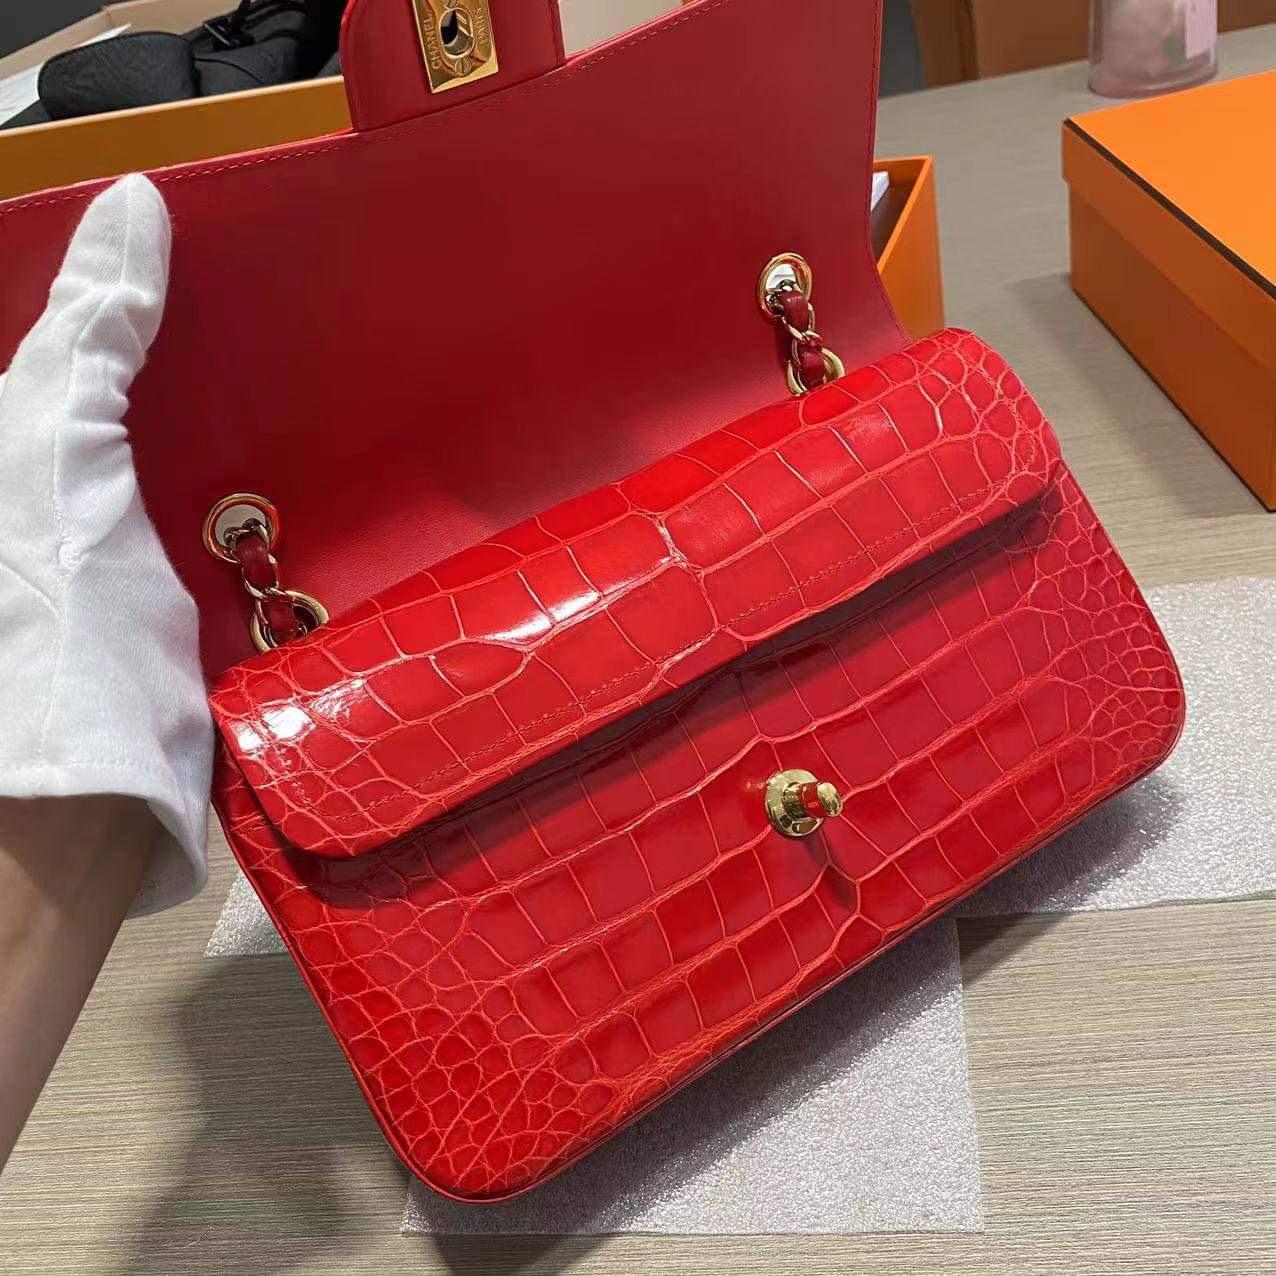 Chanel Medium Double Flap bag in shiny red alligator with gold hardware  For Sale 6